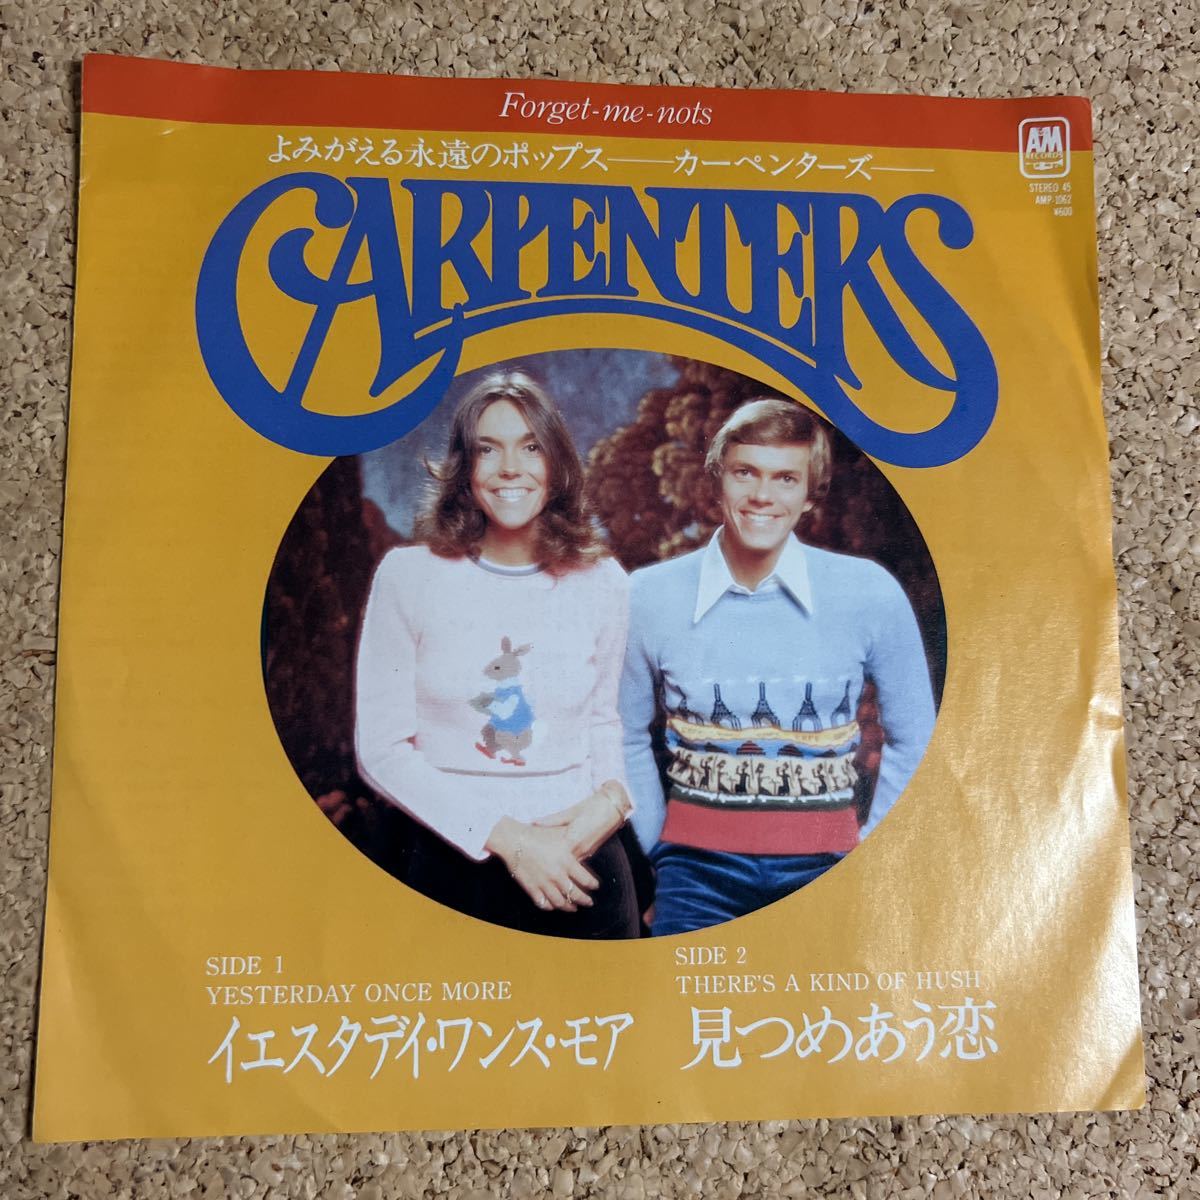 CARPENTERS カーペンターズ / YESTERDAY ONCE MORE / THERE'S A KIND OF HUSH / 7 レコード_画像1